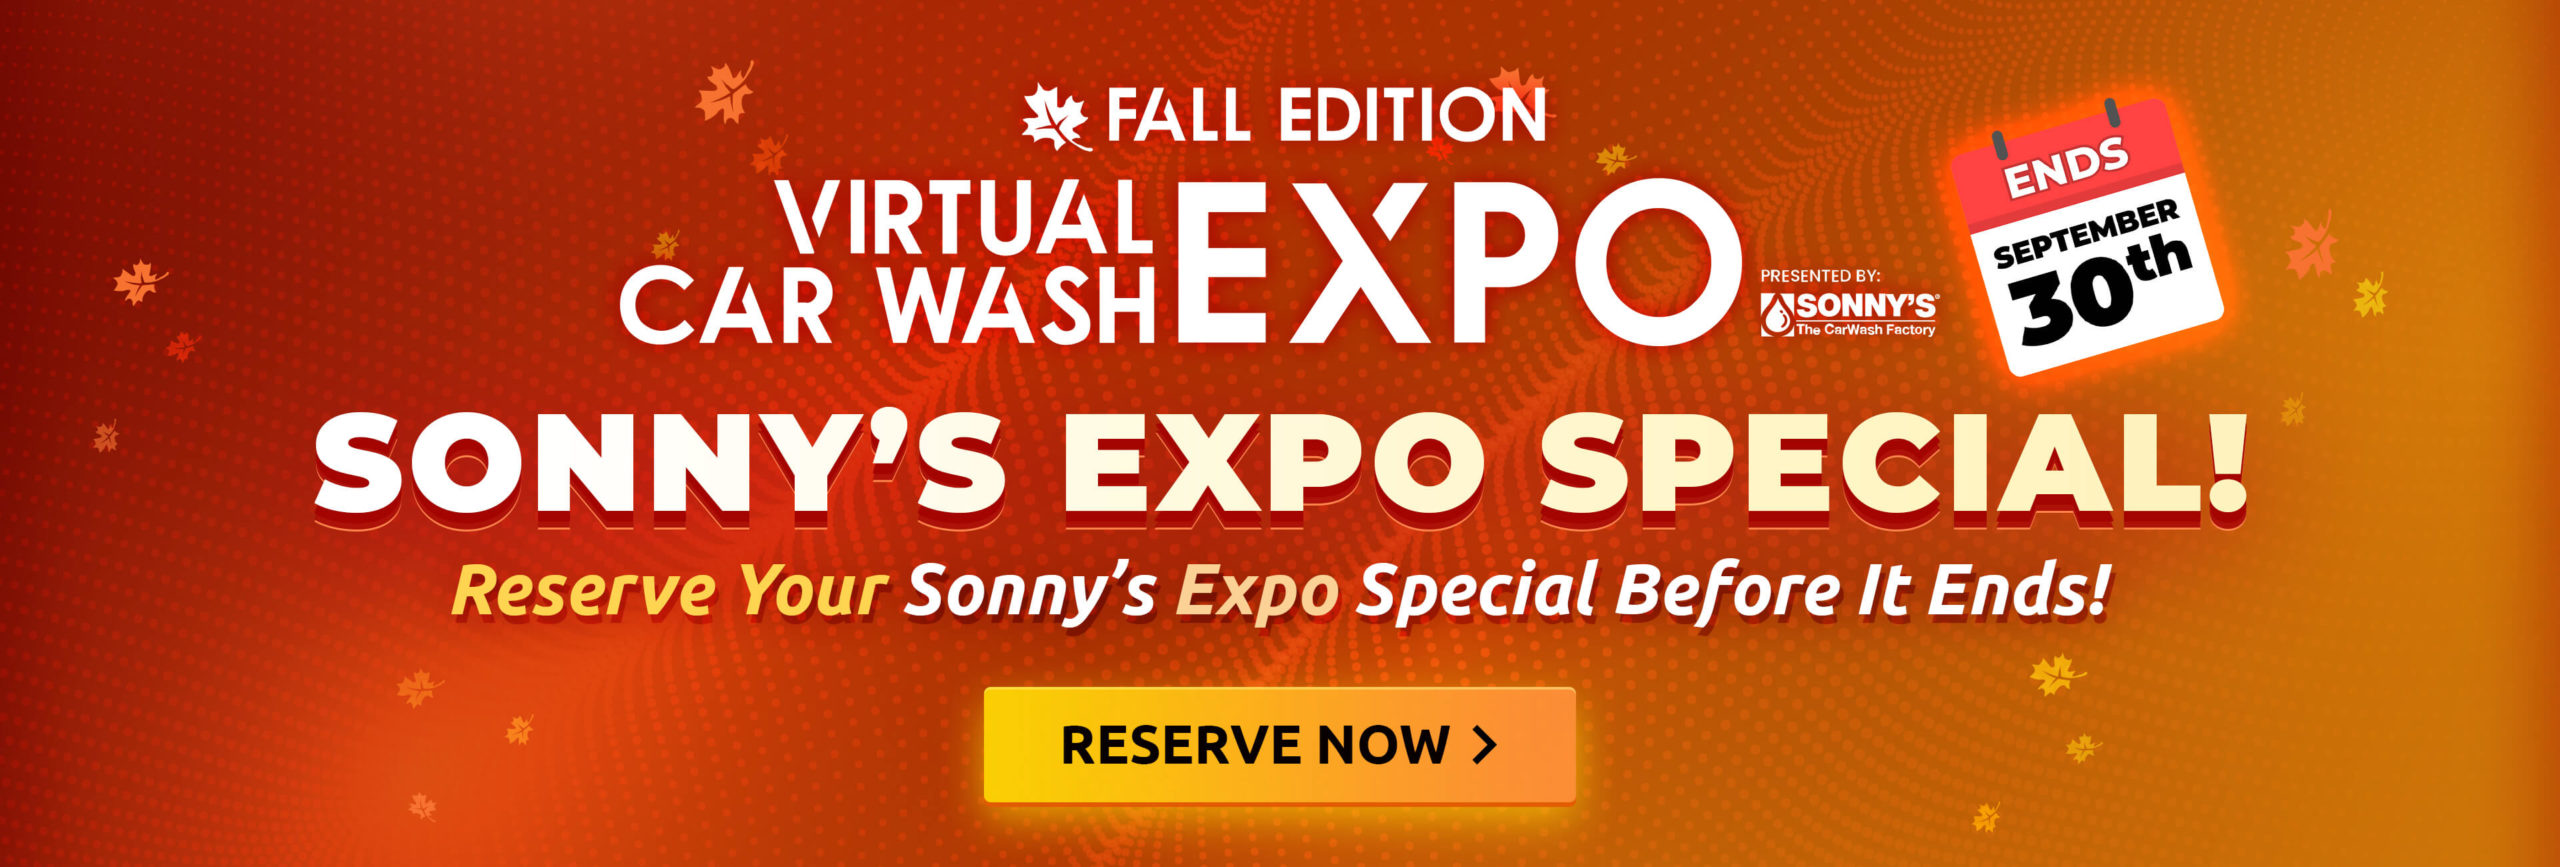 Sonny's Expo Special! Hurry! Ends September 30th